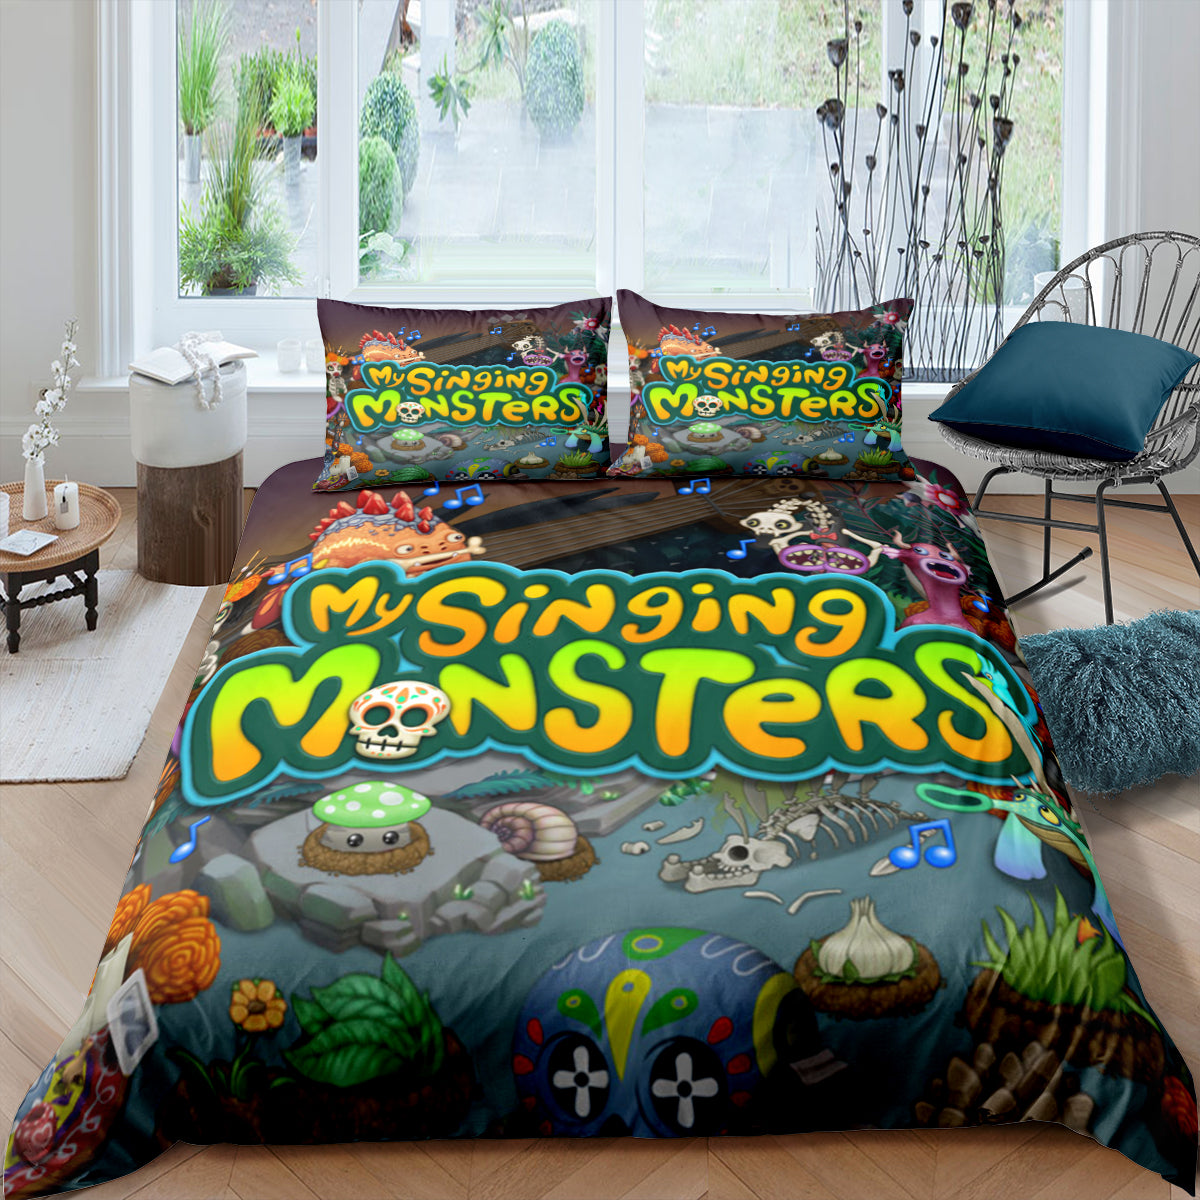 My Singing Monsters #4 3D Printed Duvet Cover Quilt Cover Pillowcase Bedding Set Bed Linen Home Decor